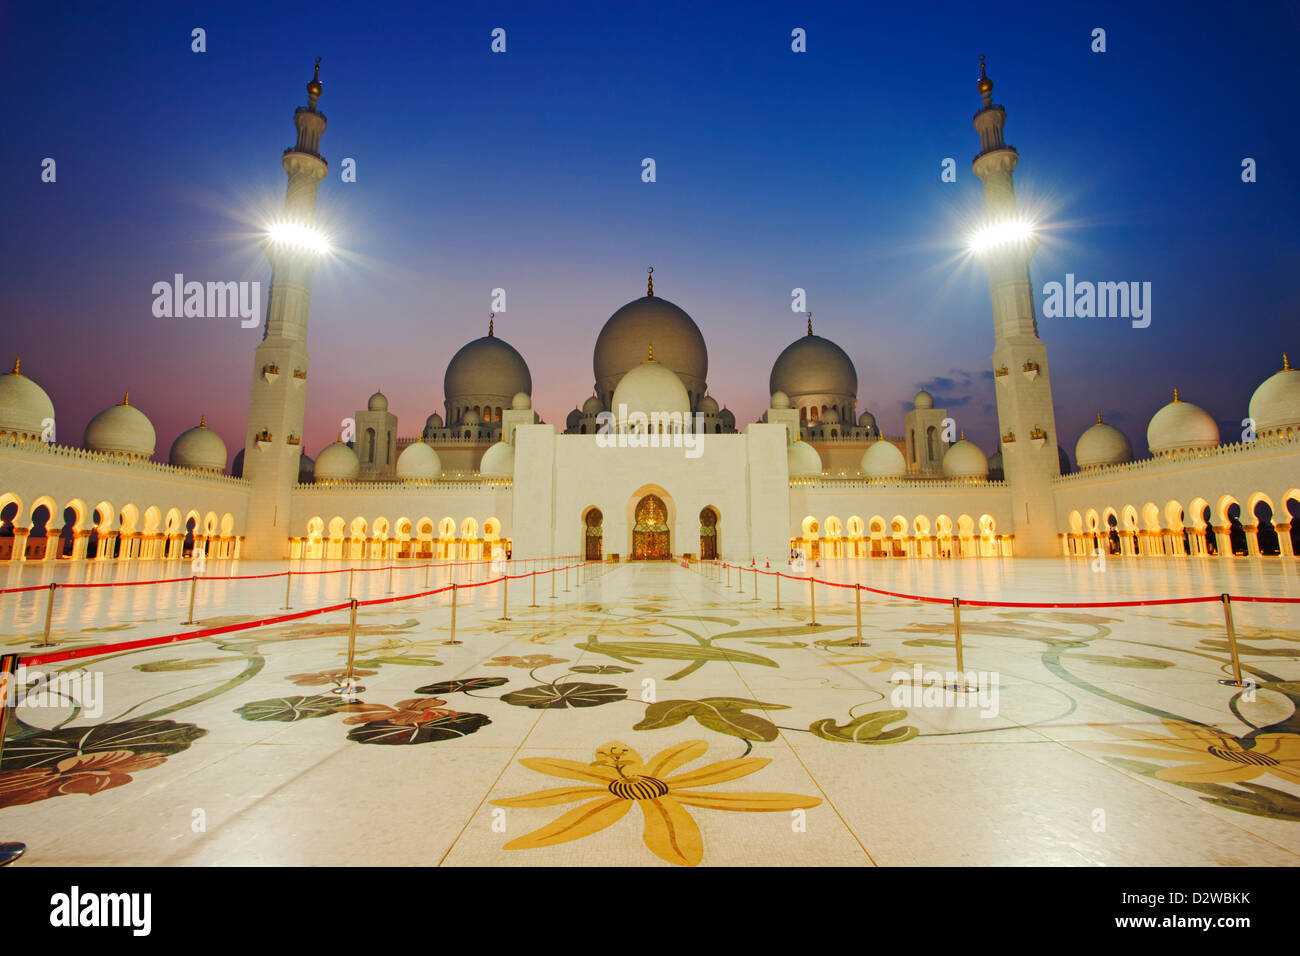 Sheikh Zayed Grand Mosque is one of the largest mosques in the world in Abu Dhabi, UAE. Stock Photo